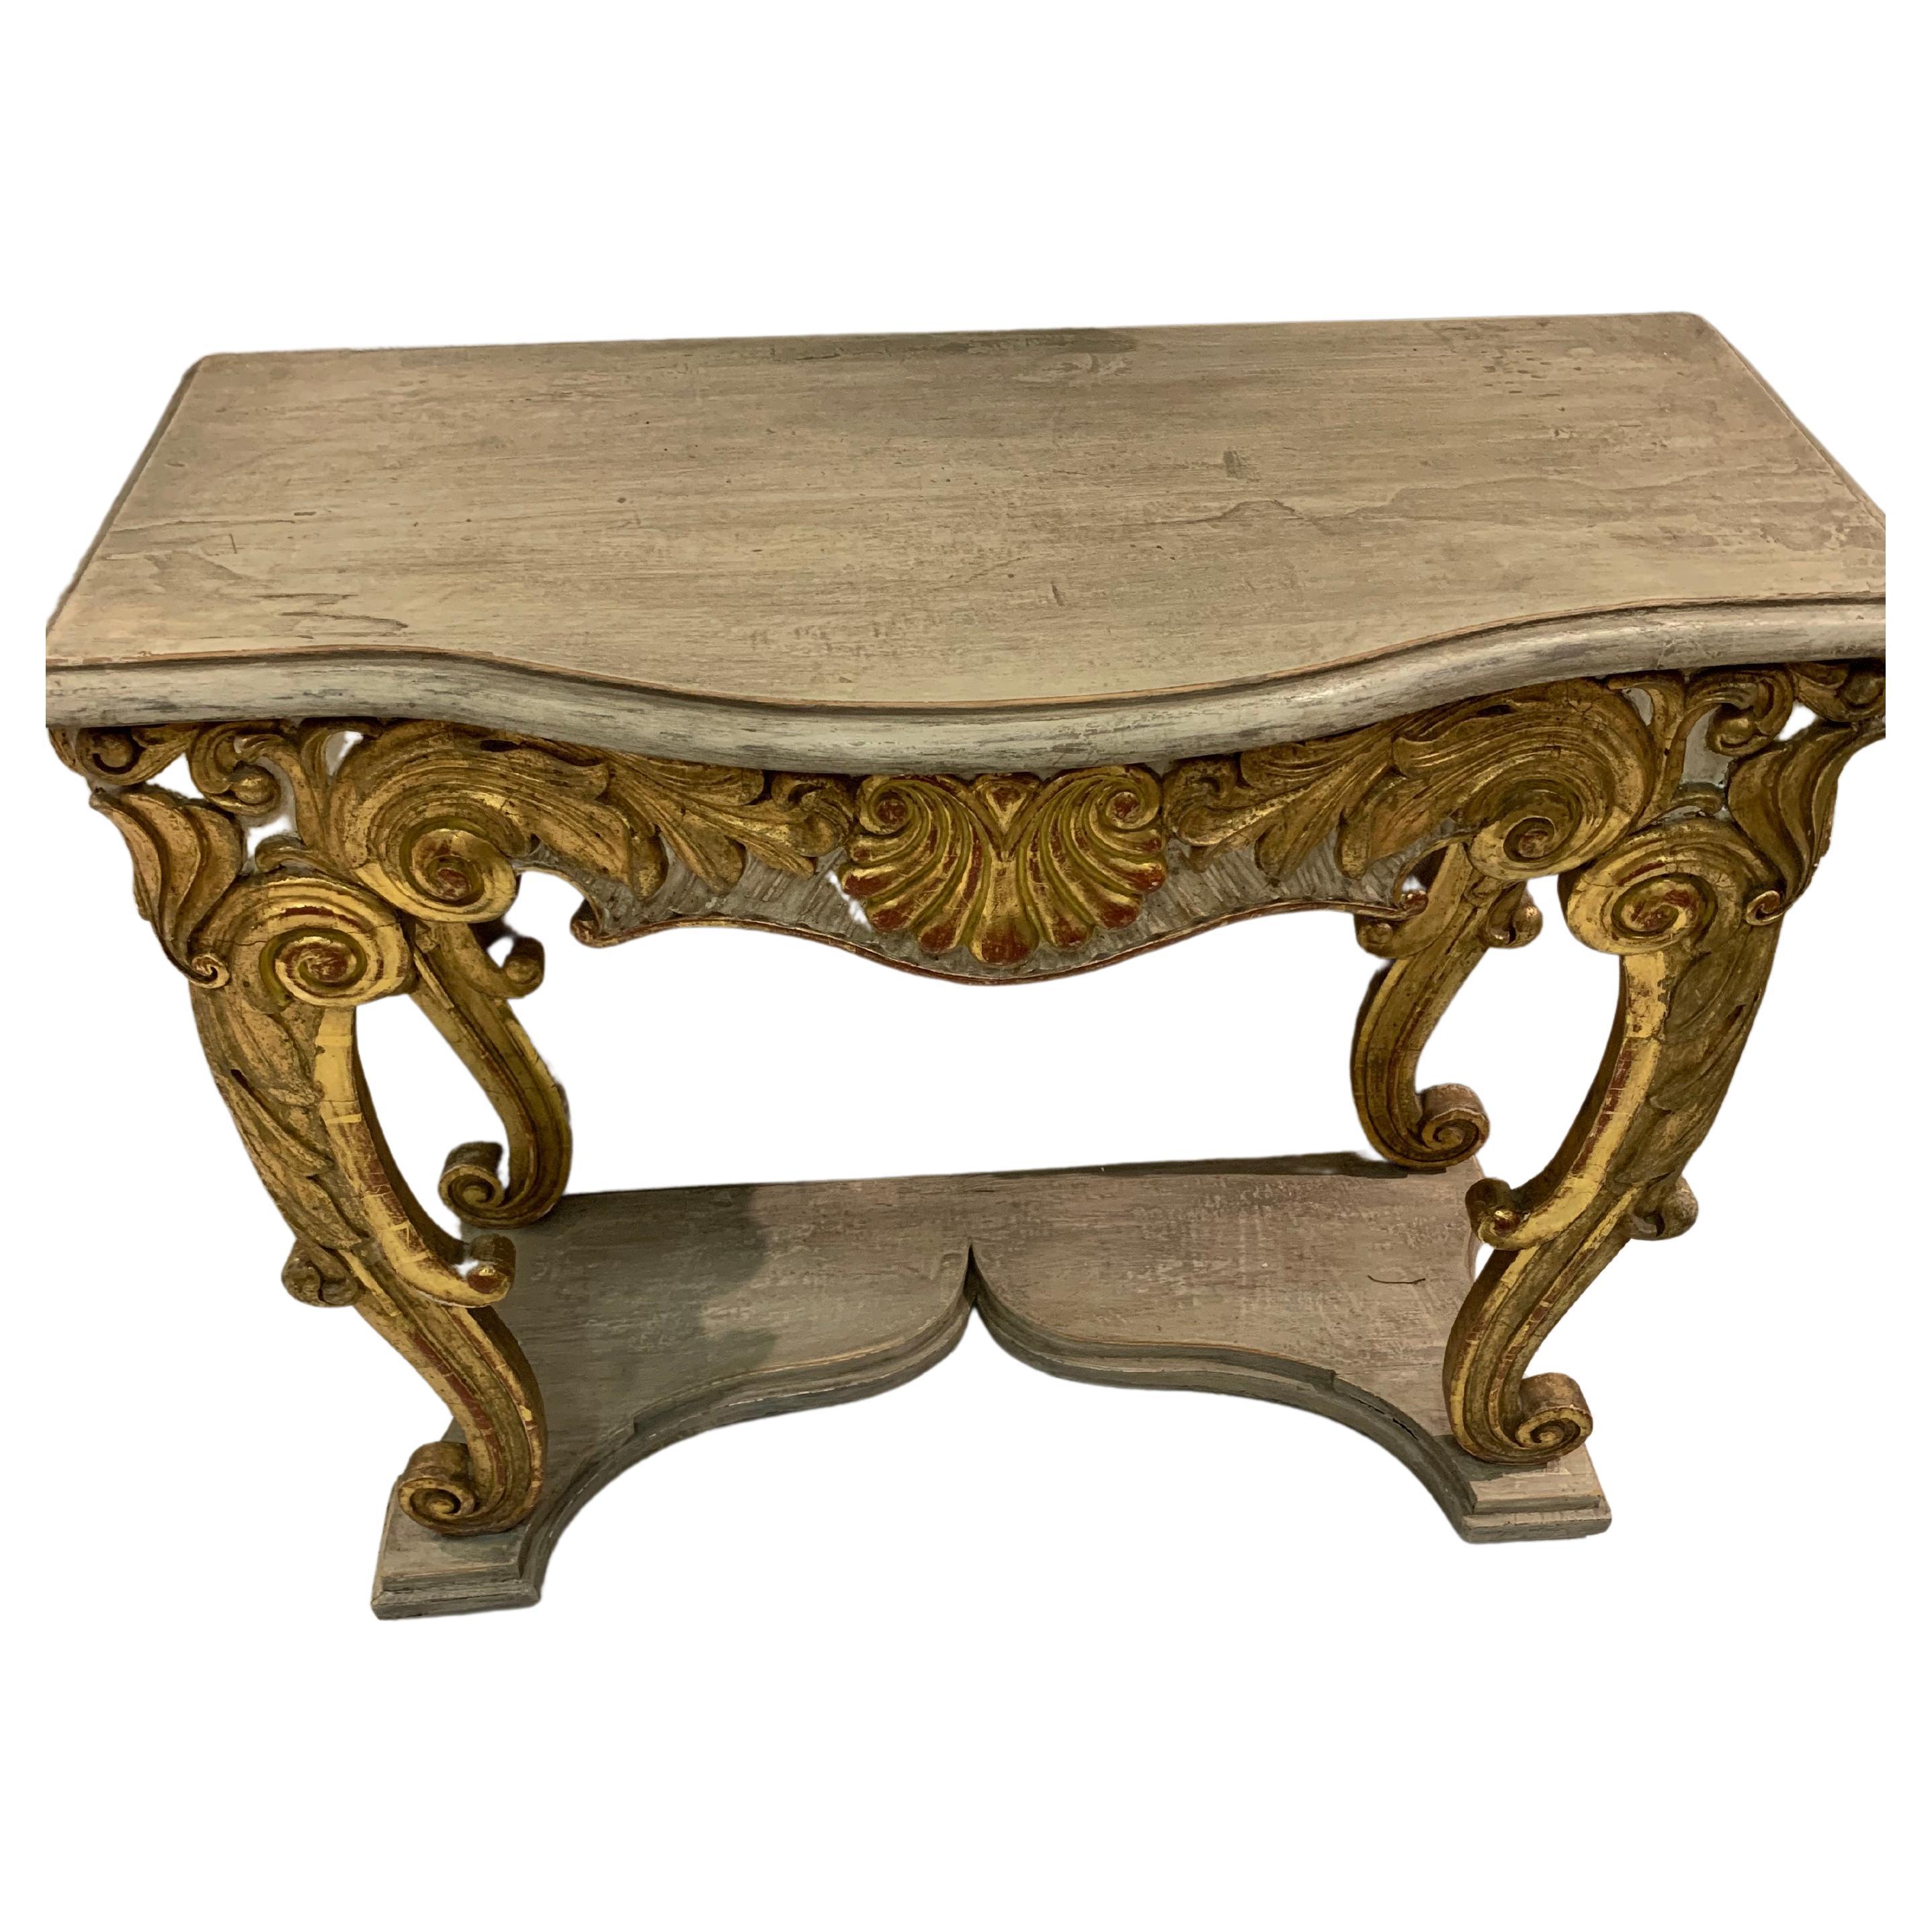 Circa 1850 Swedish rococo style console table.
This decorative piece has gilded scroll detailing and legs with a shell decoration to the centre.
The base and drop in top are painted which has been refreshed and restored at some point in the past.